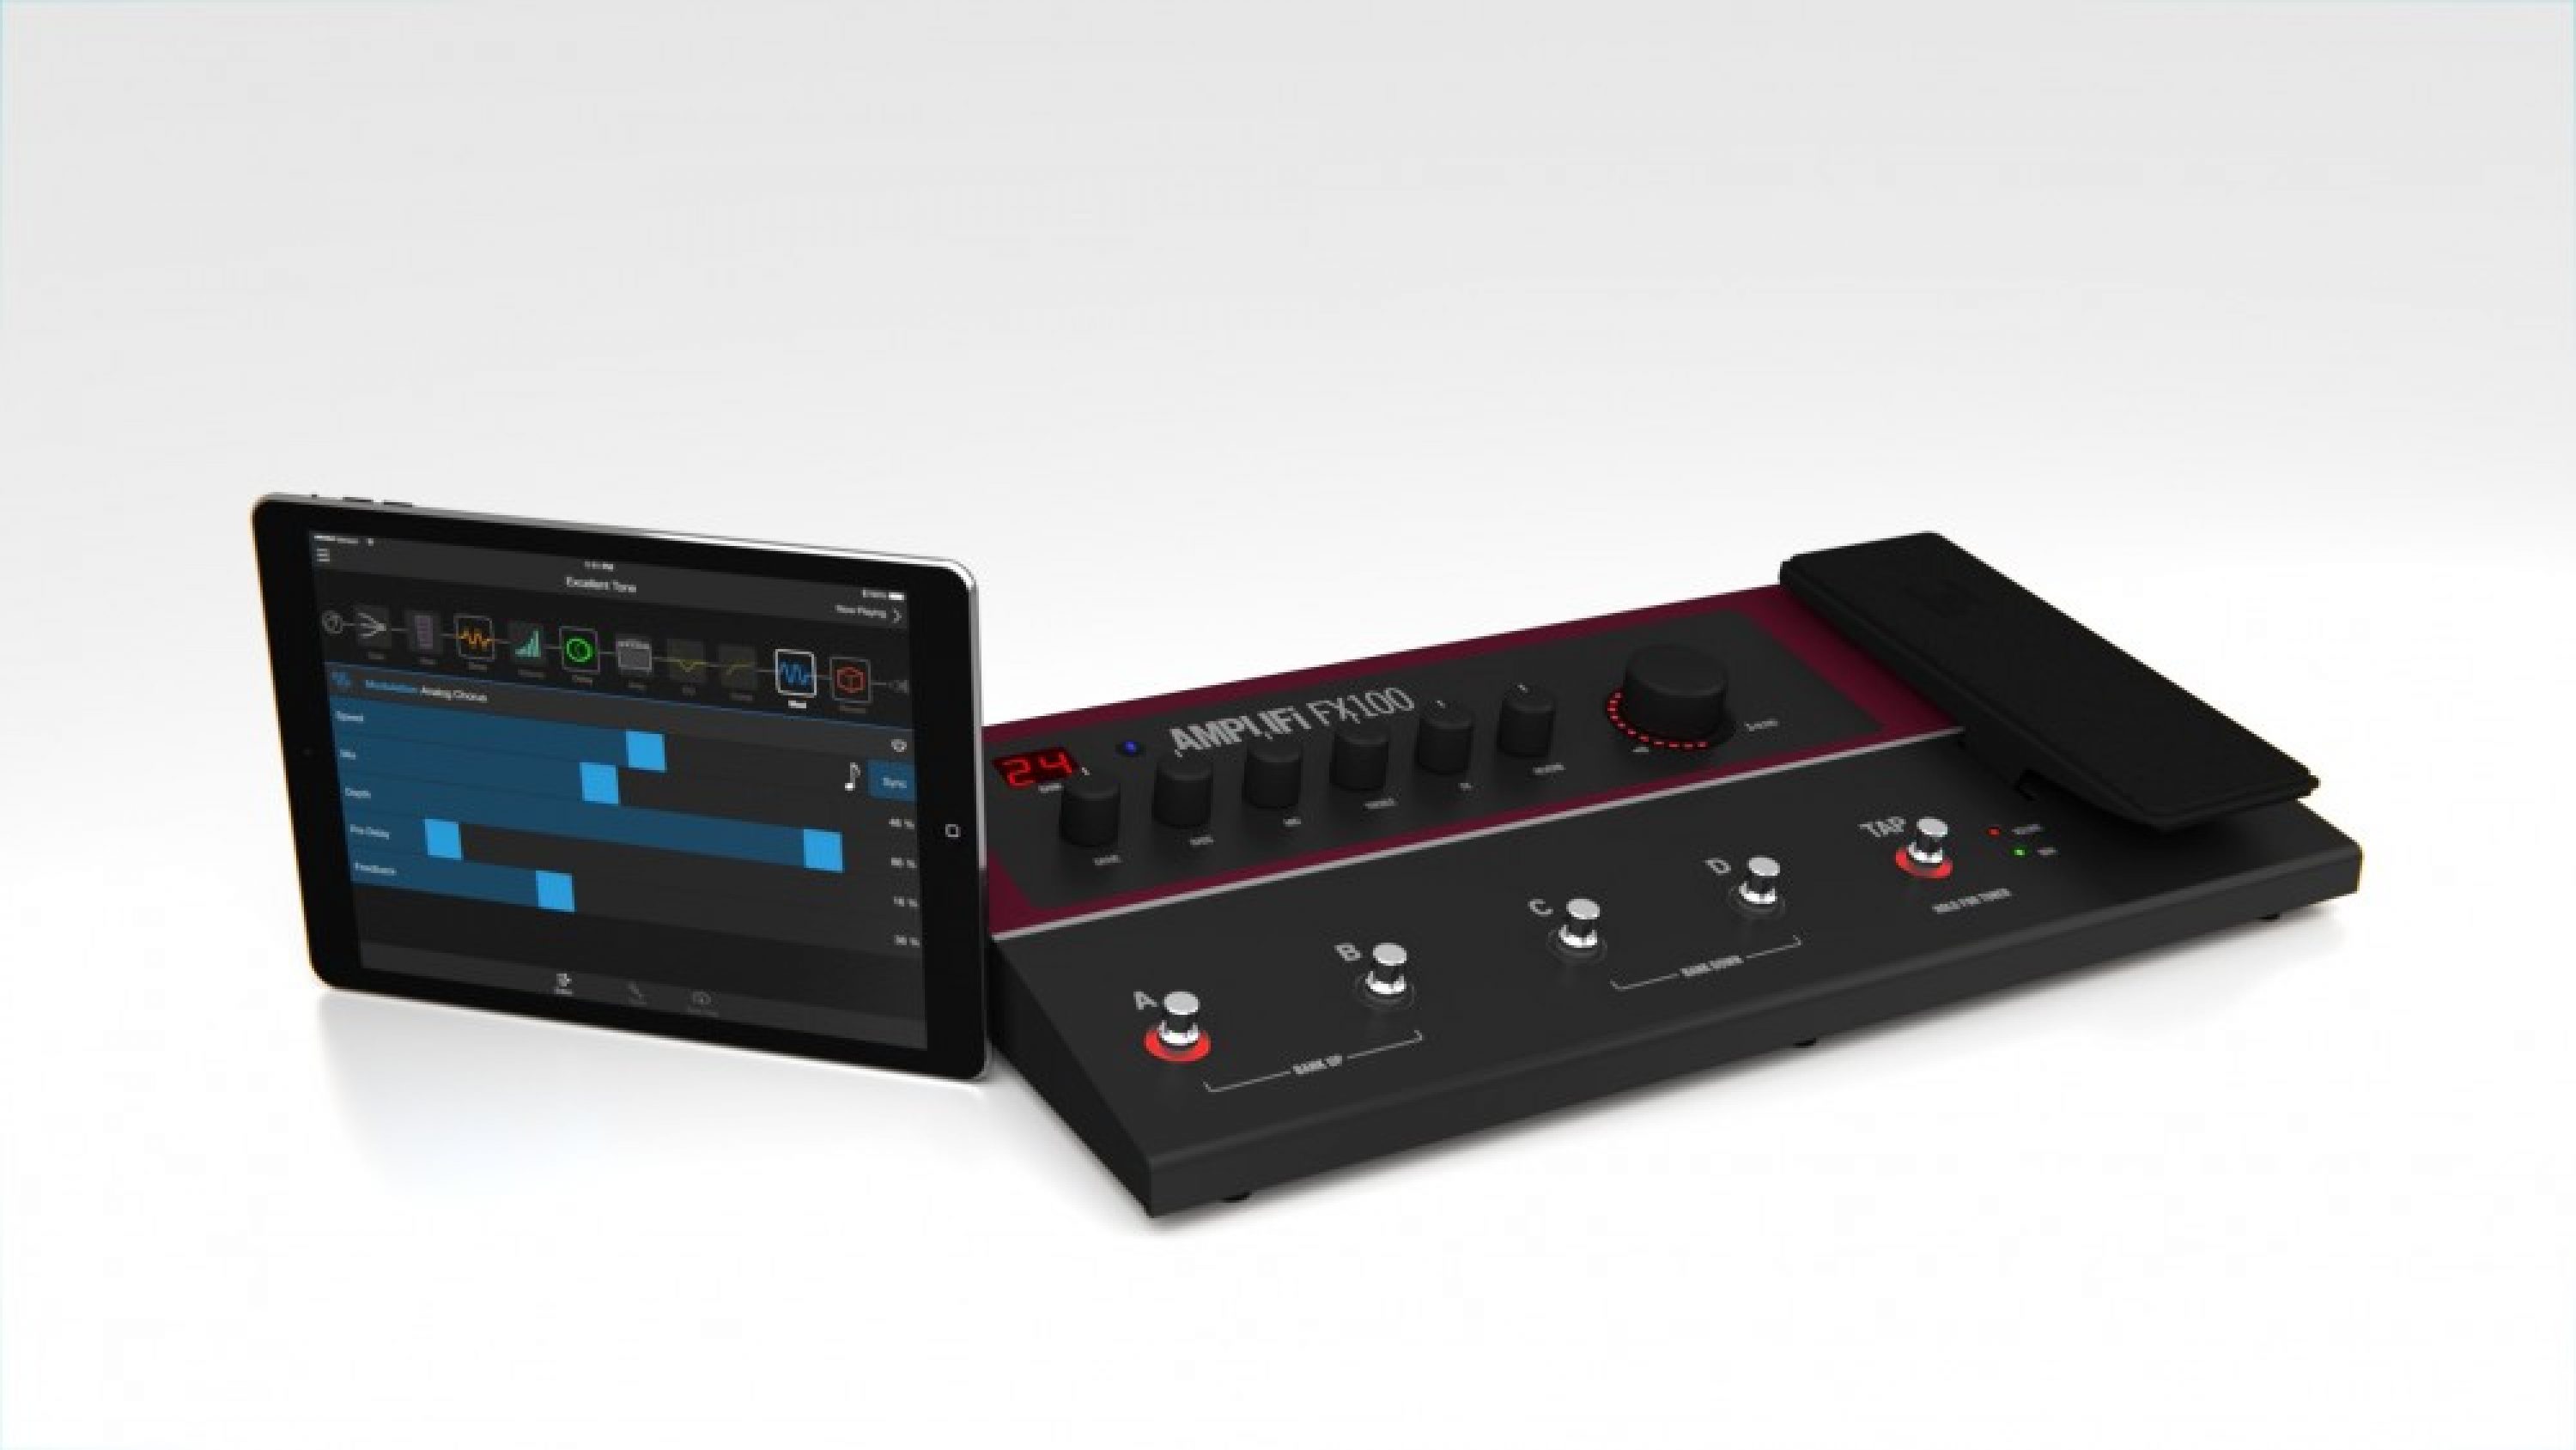 Line 6 releases AMPLIFi FX100 effects unit with Bluetooth connectivity - All Things Gear